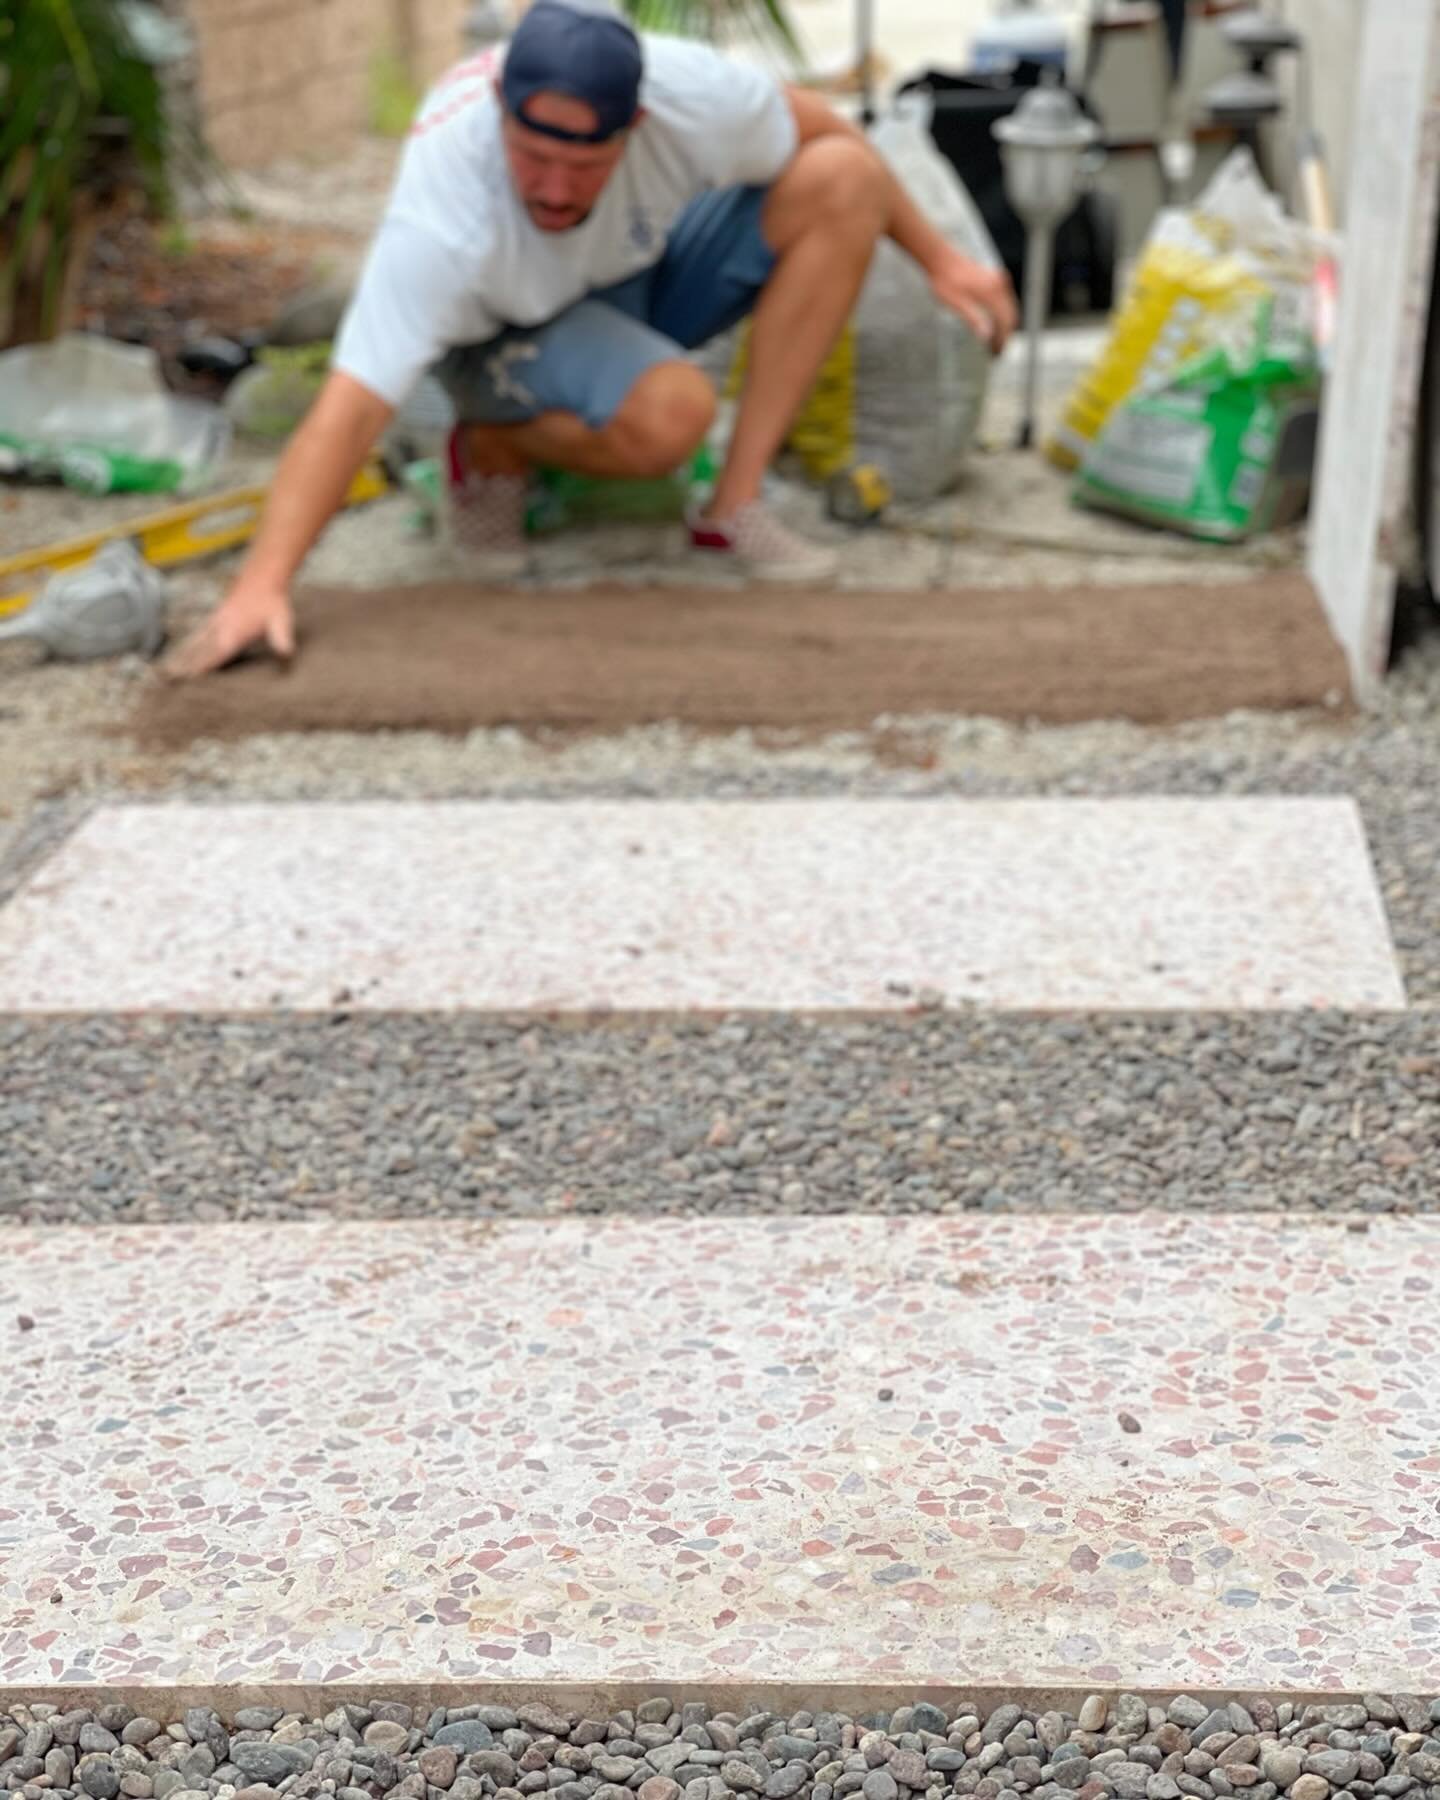 let&rsquo;s go outside 🌴 //

concrete collaborative outdoor has some amazing products to offer, including these pink terrazzo pavers set as steppers for a modern touch 

featuring 〰️ trails alabaster large pink chip terrazzo pavers